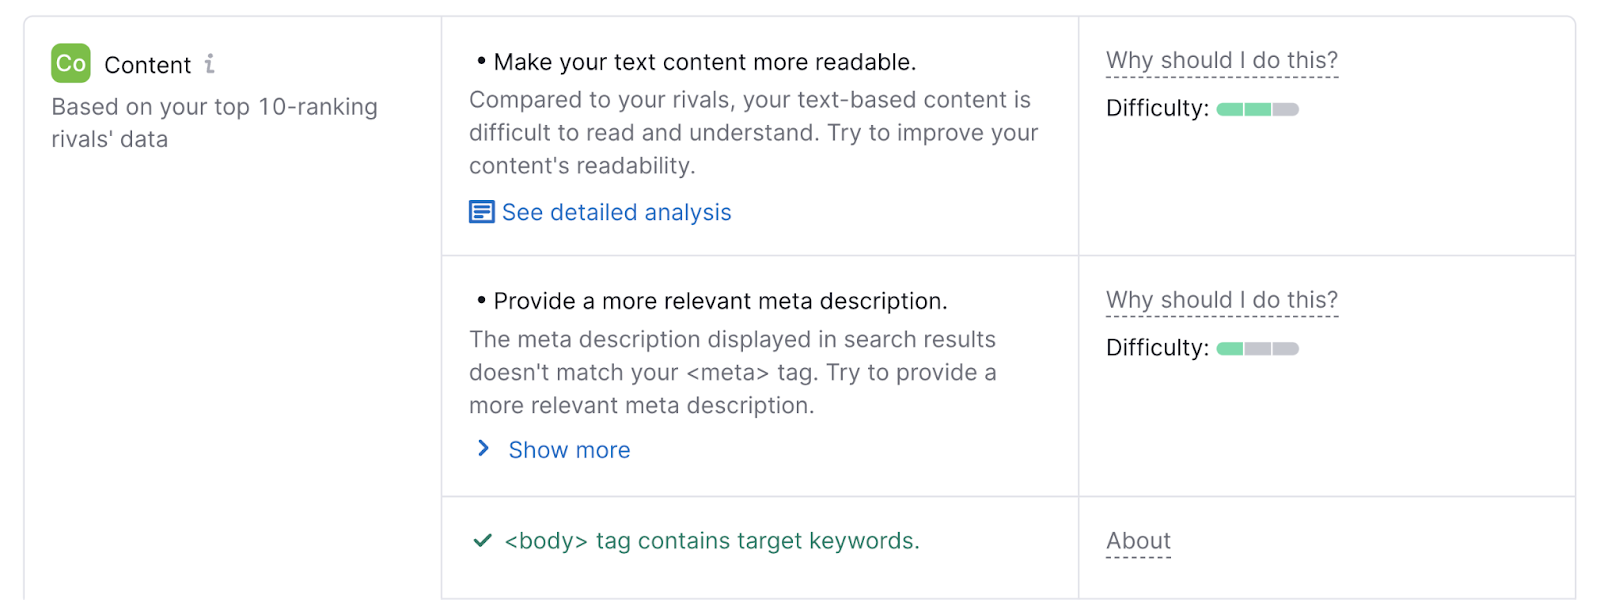 content optimization ideas include making text more readable and proving more relevant meta descriptions